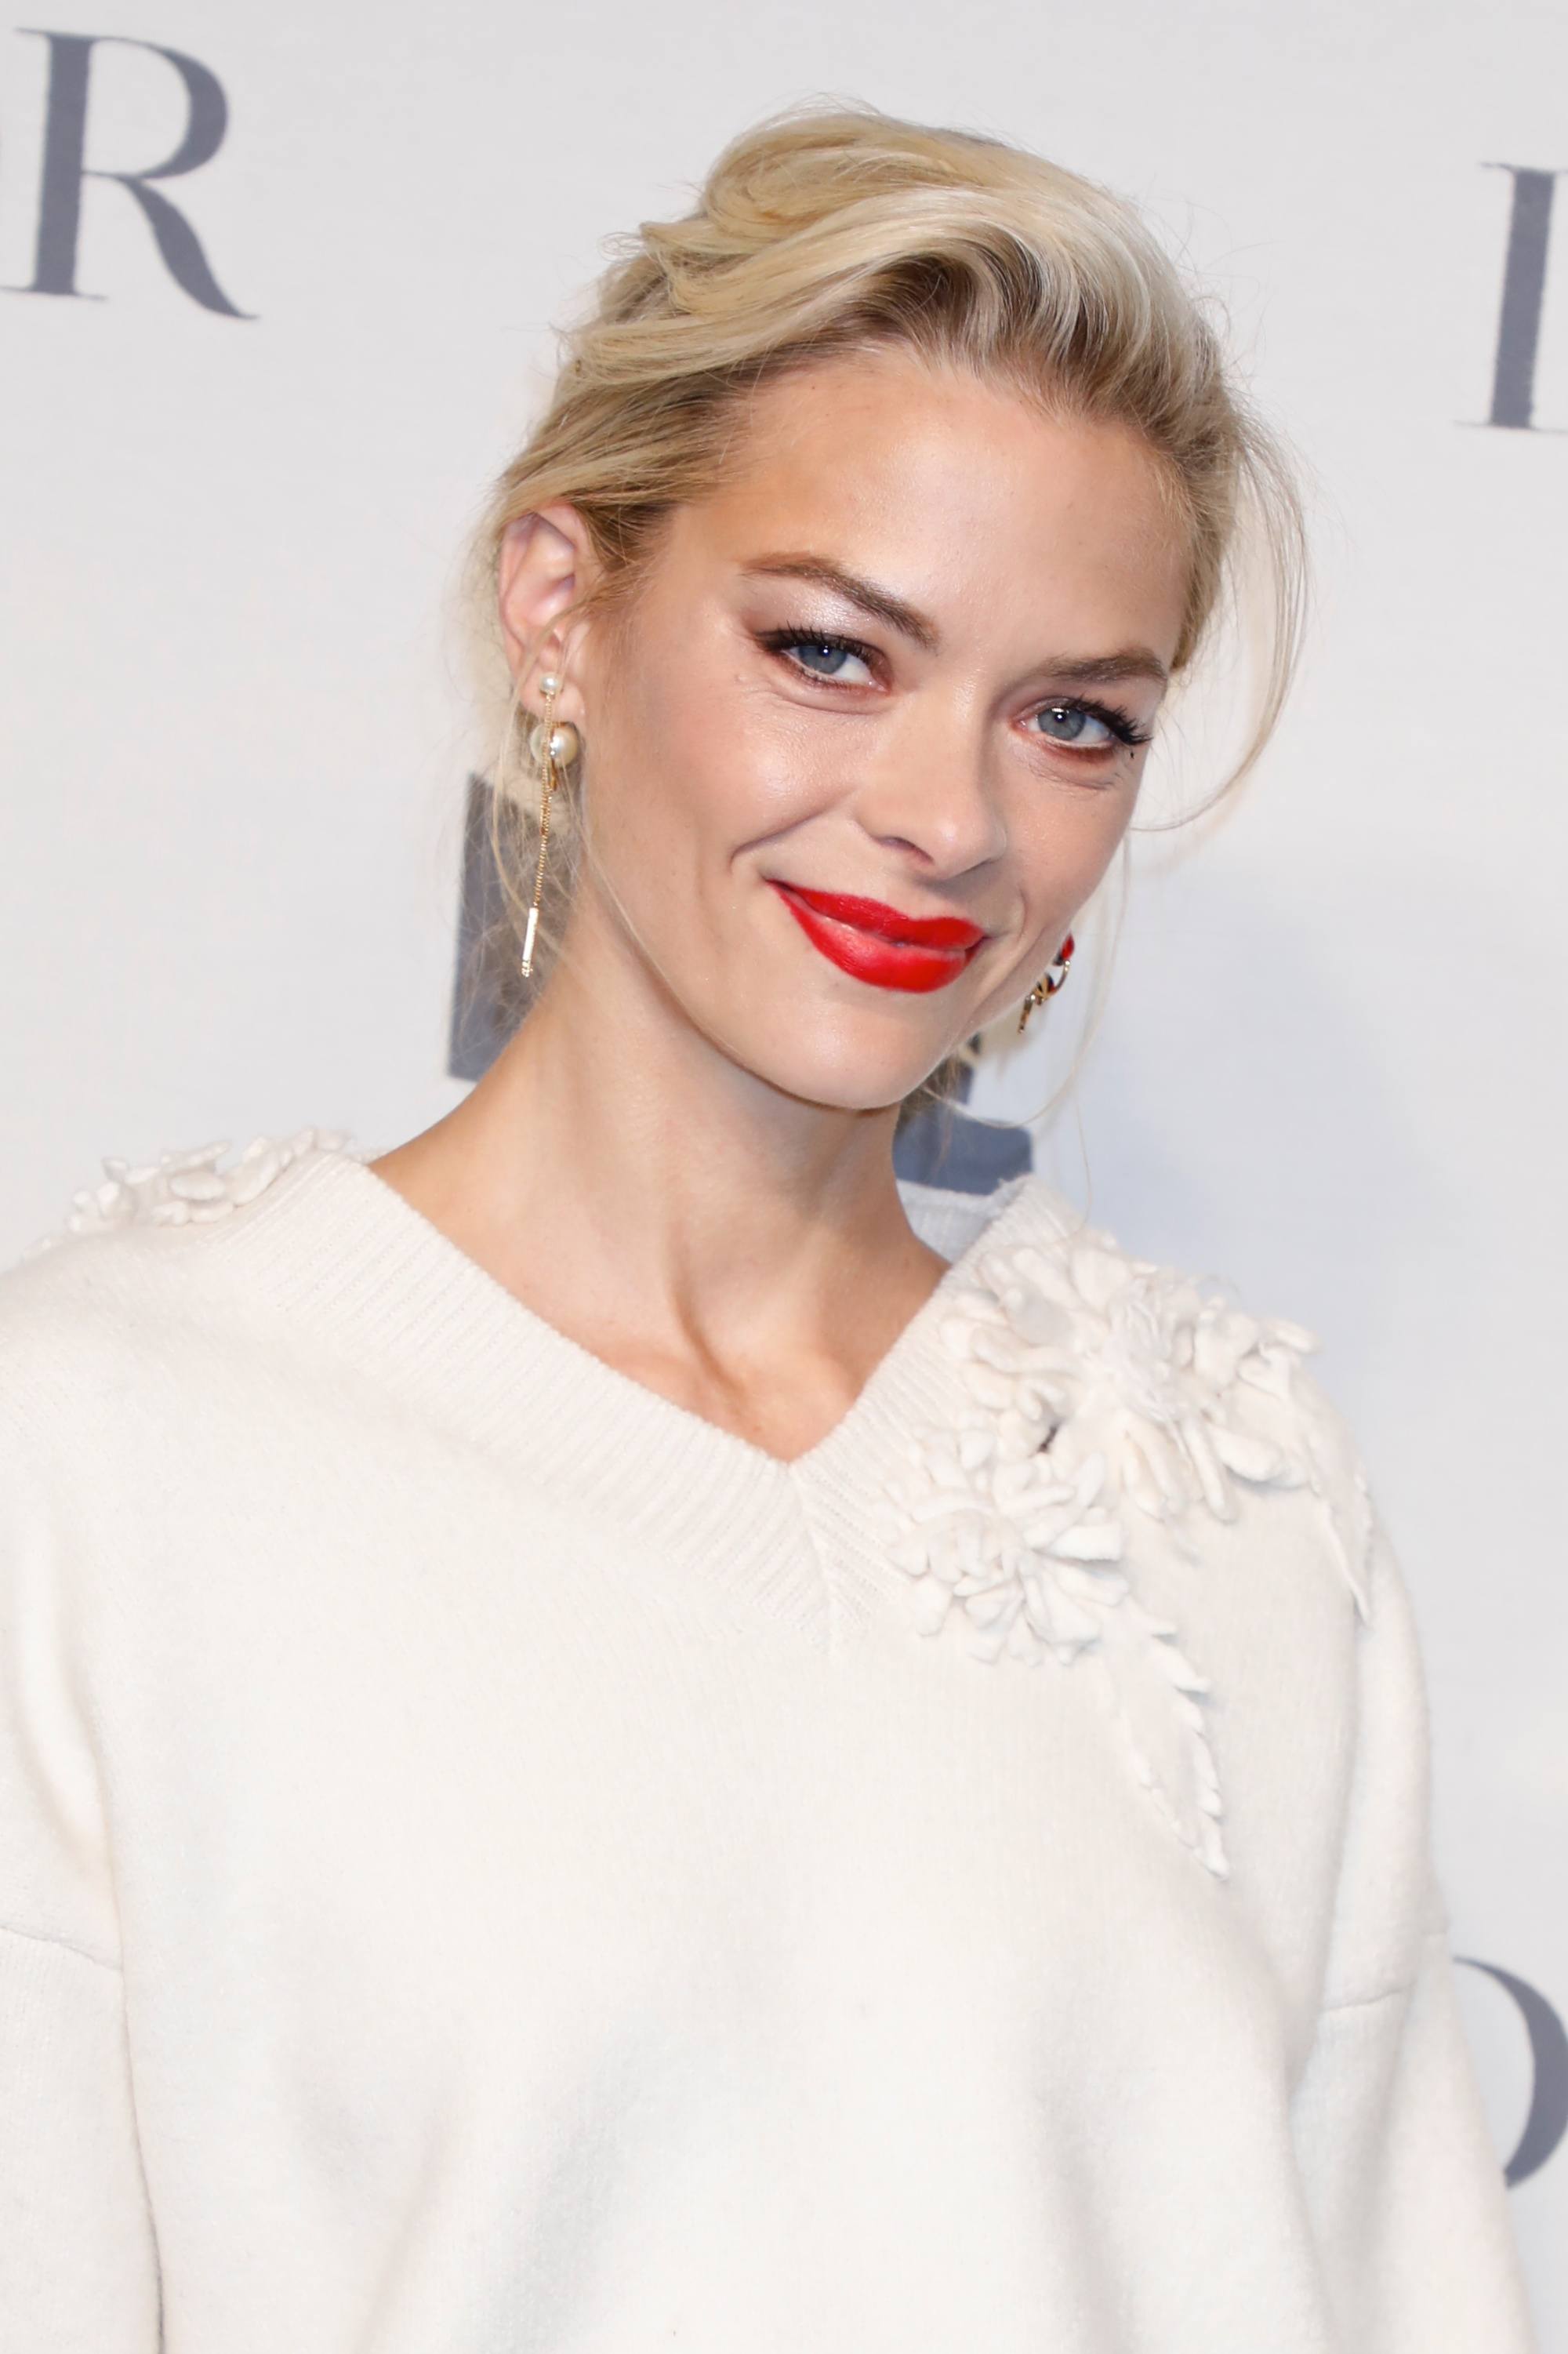 Jamie King with her golden blonde hair styled into a loose pomp, wearing all white on the red carpet